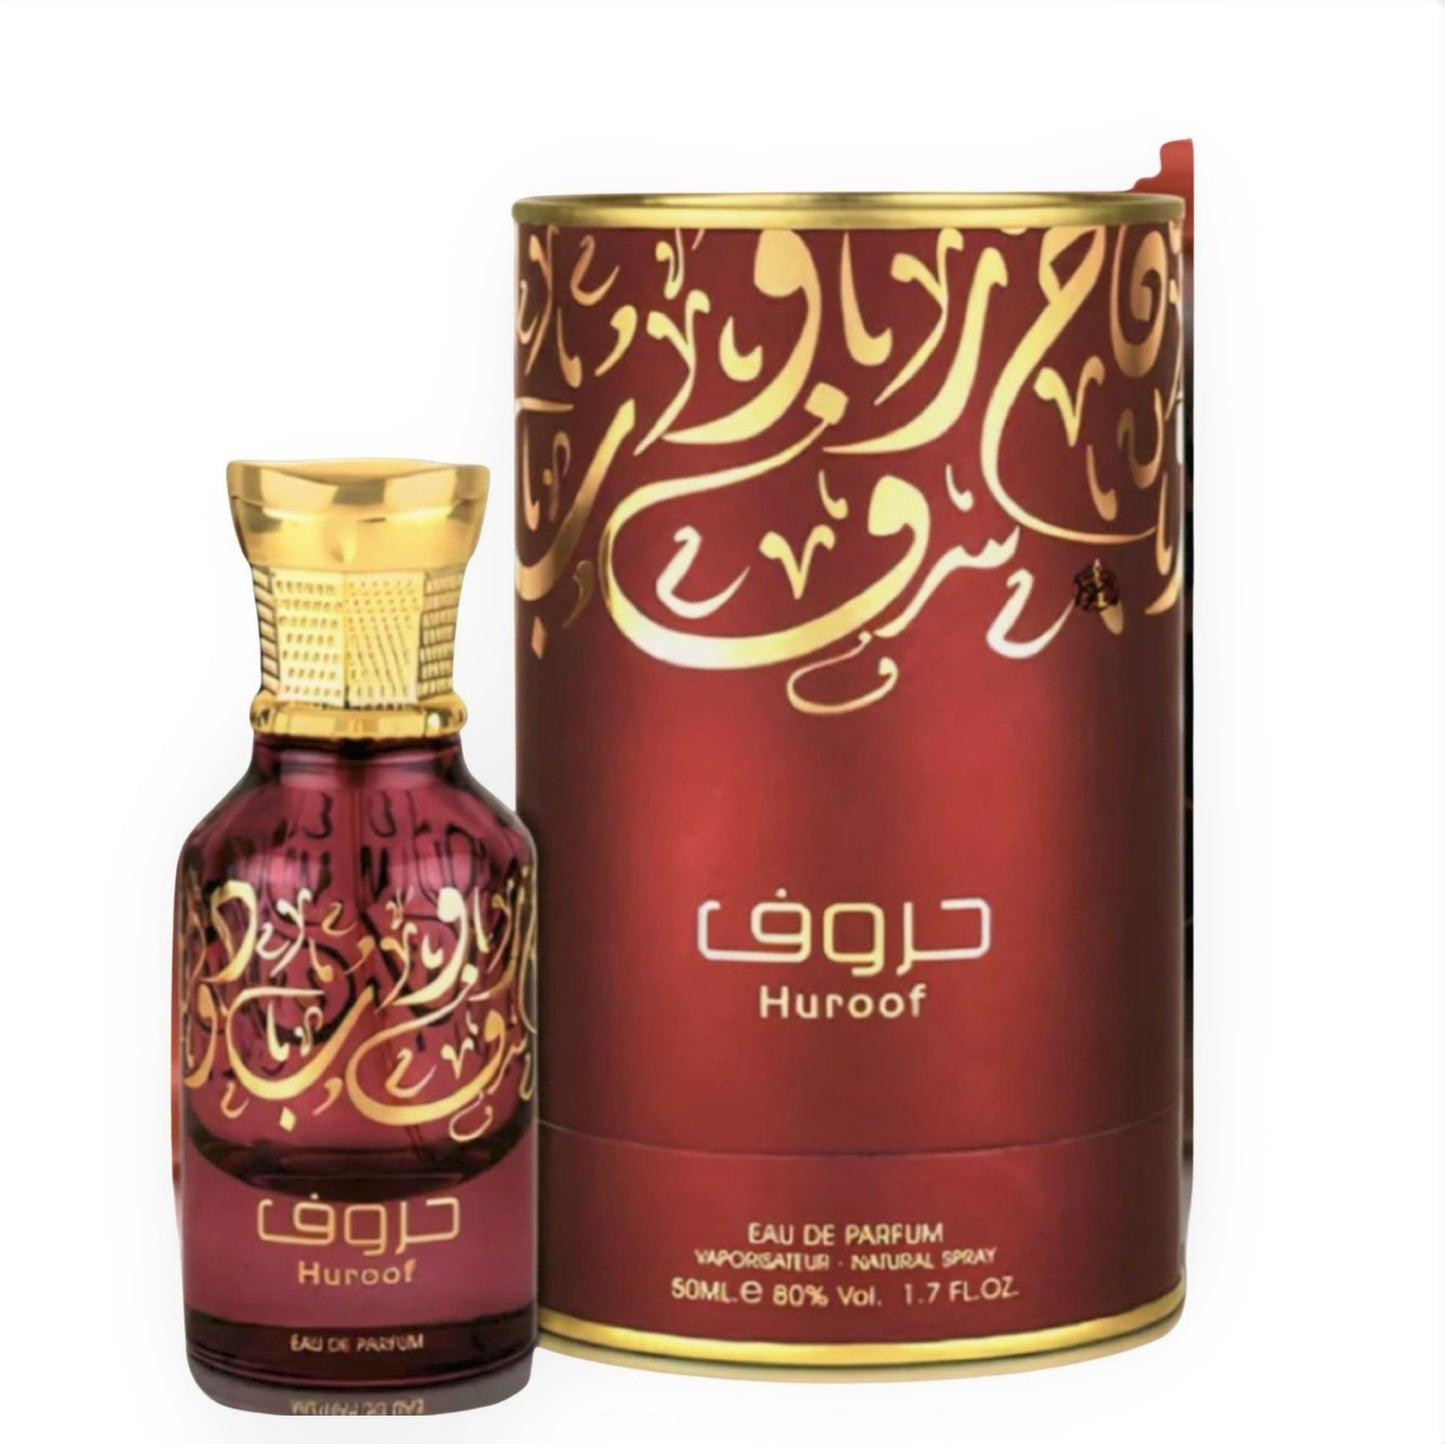 100ml Eau de Perfume Huroof Spicy Oud Fragrance For Men (Top: Saffron, Rose / Middle: White Flowers / Base: Cambodian Oud, Musk, Amber) | -80% Akce na Šperky